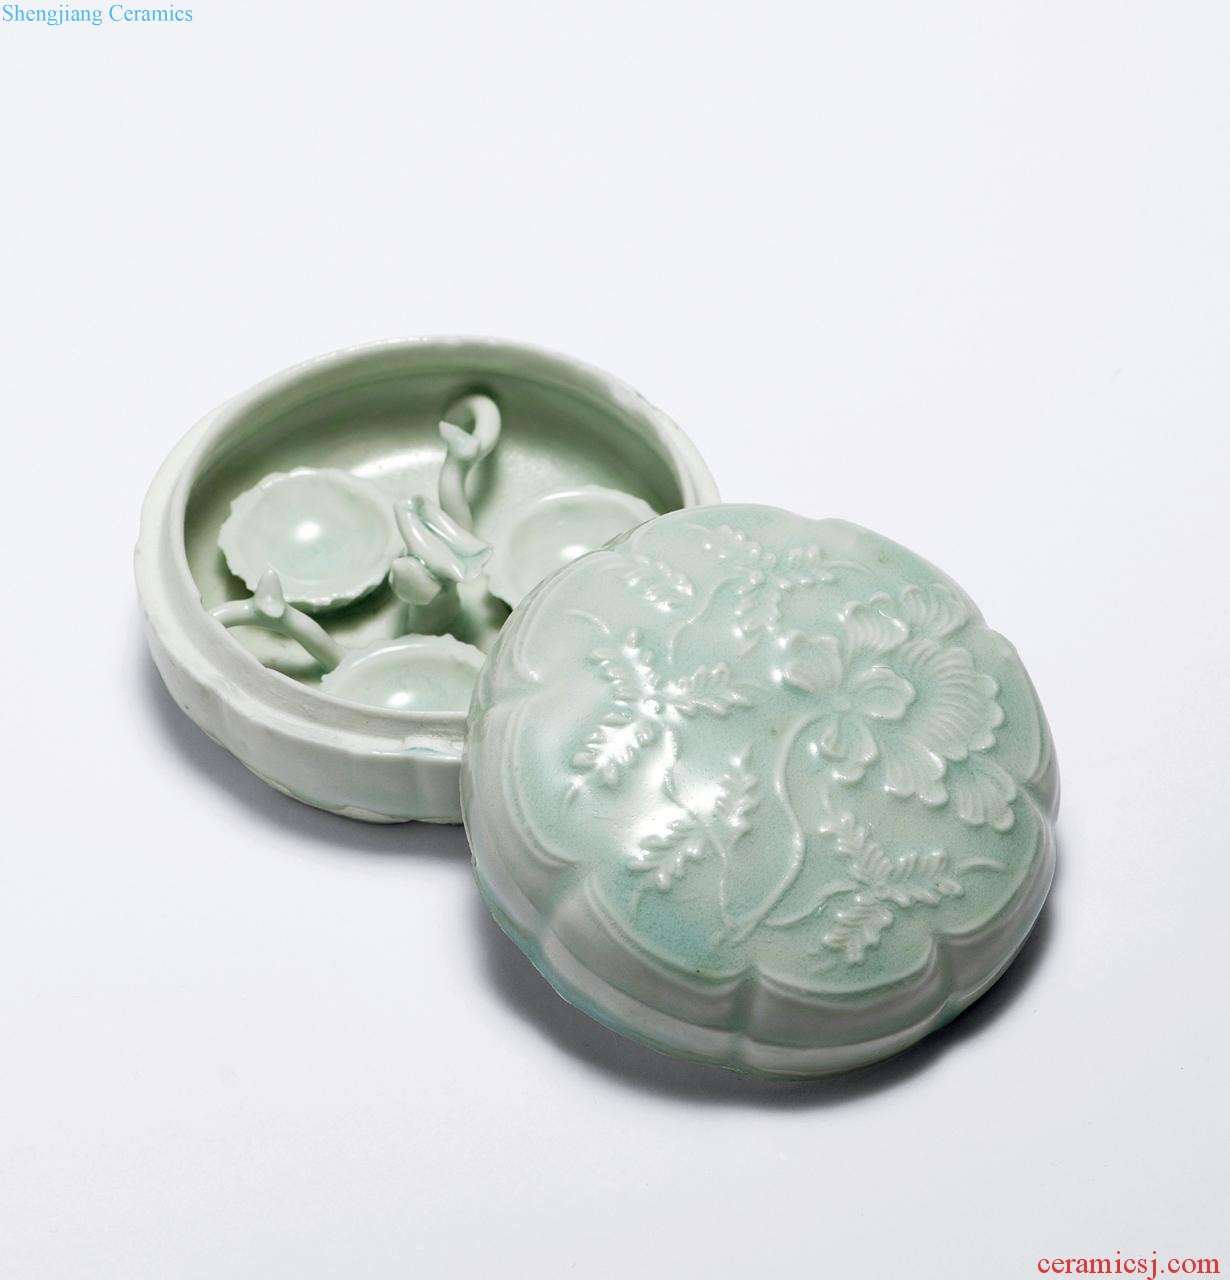 The song dynasty (960-960) green printing craft flower shape box